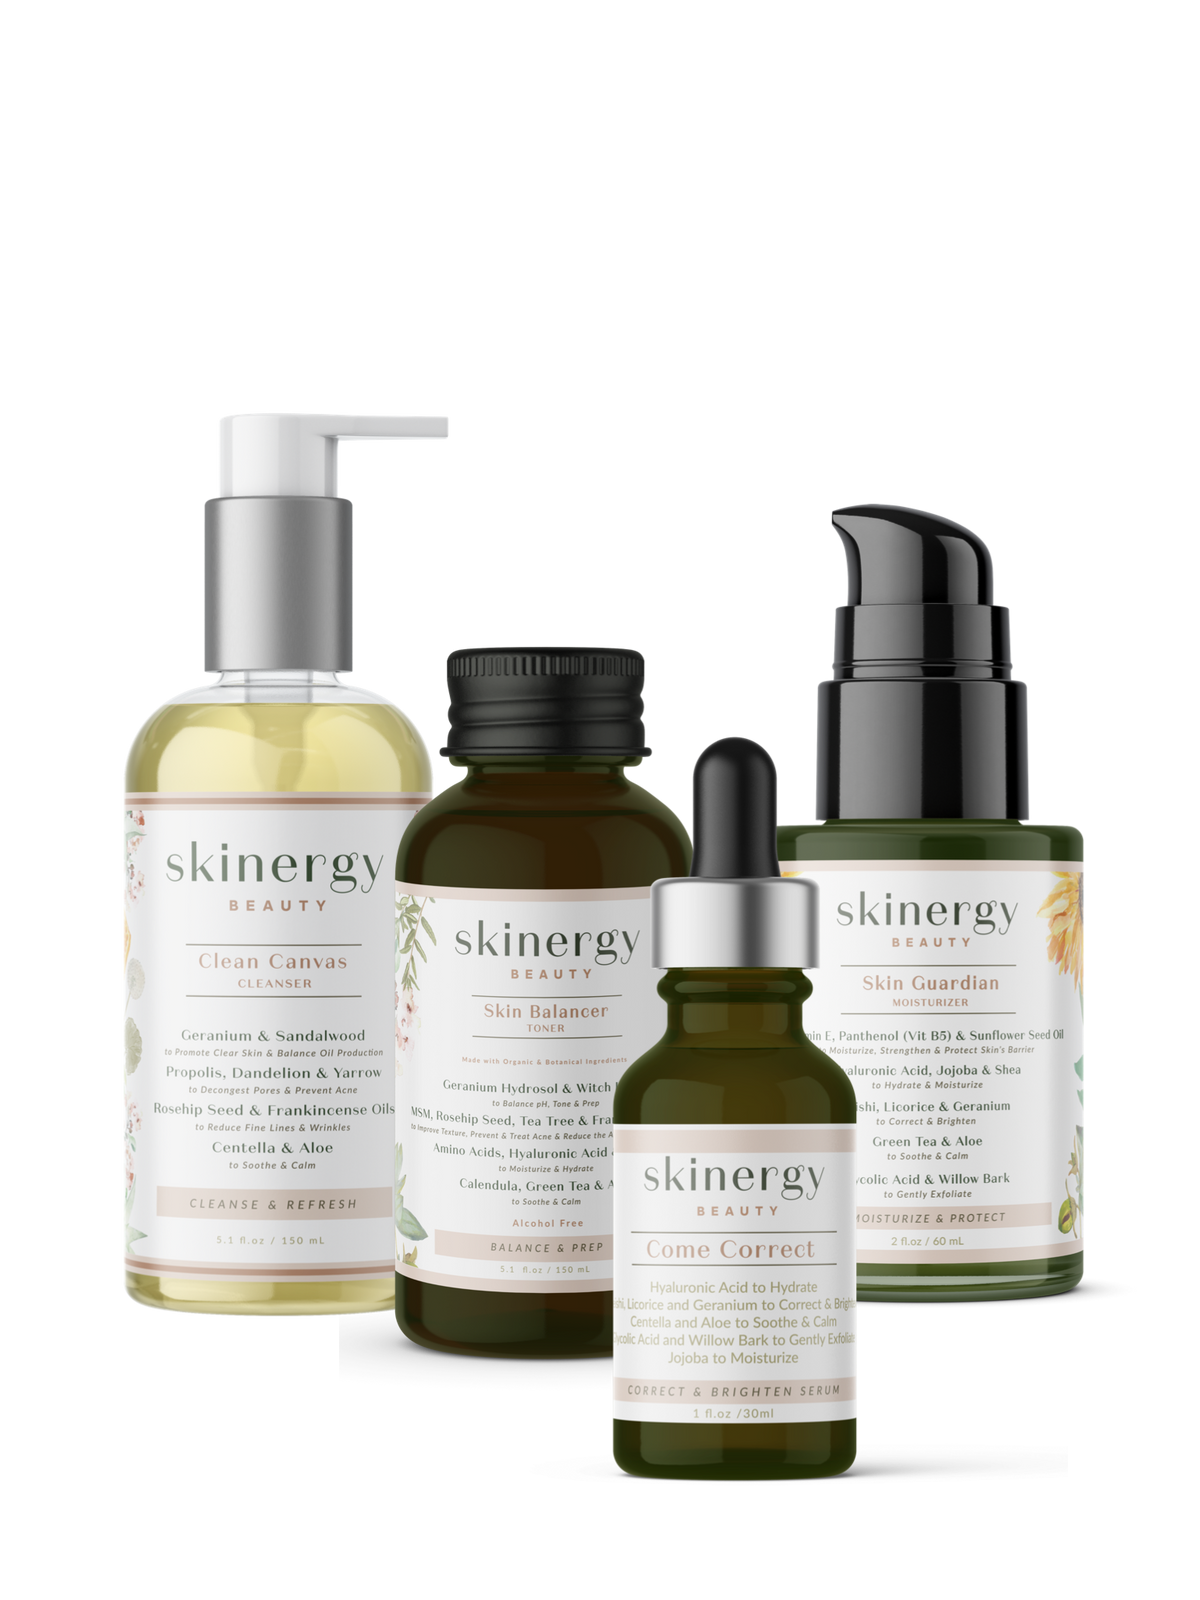 The Re-energizing Four Step Skincare Kit by Skinergy Beauty